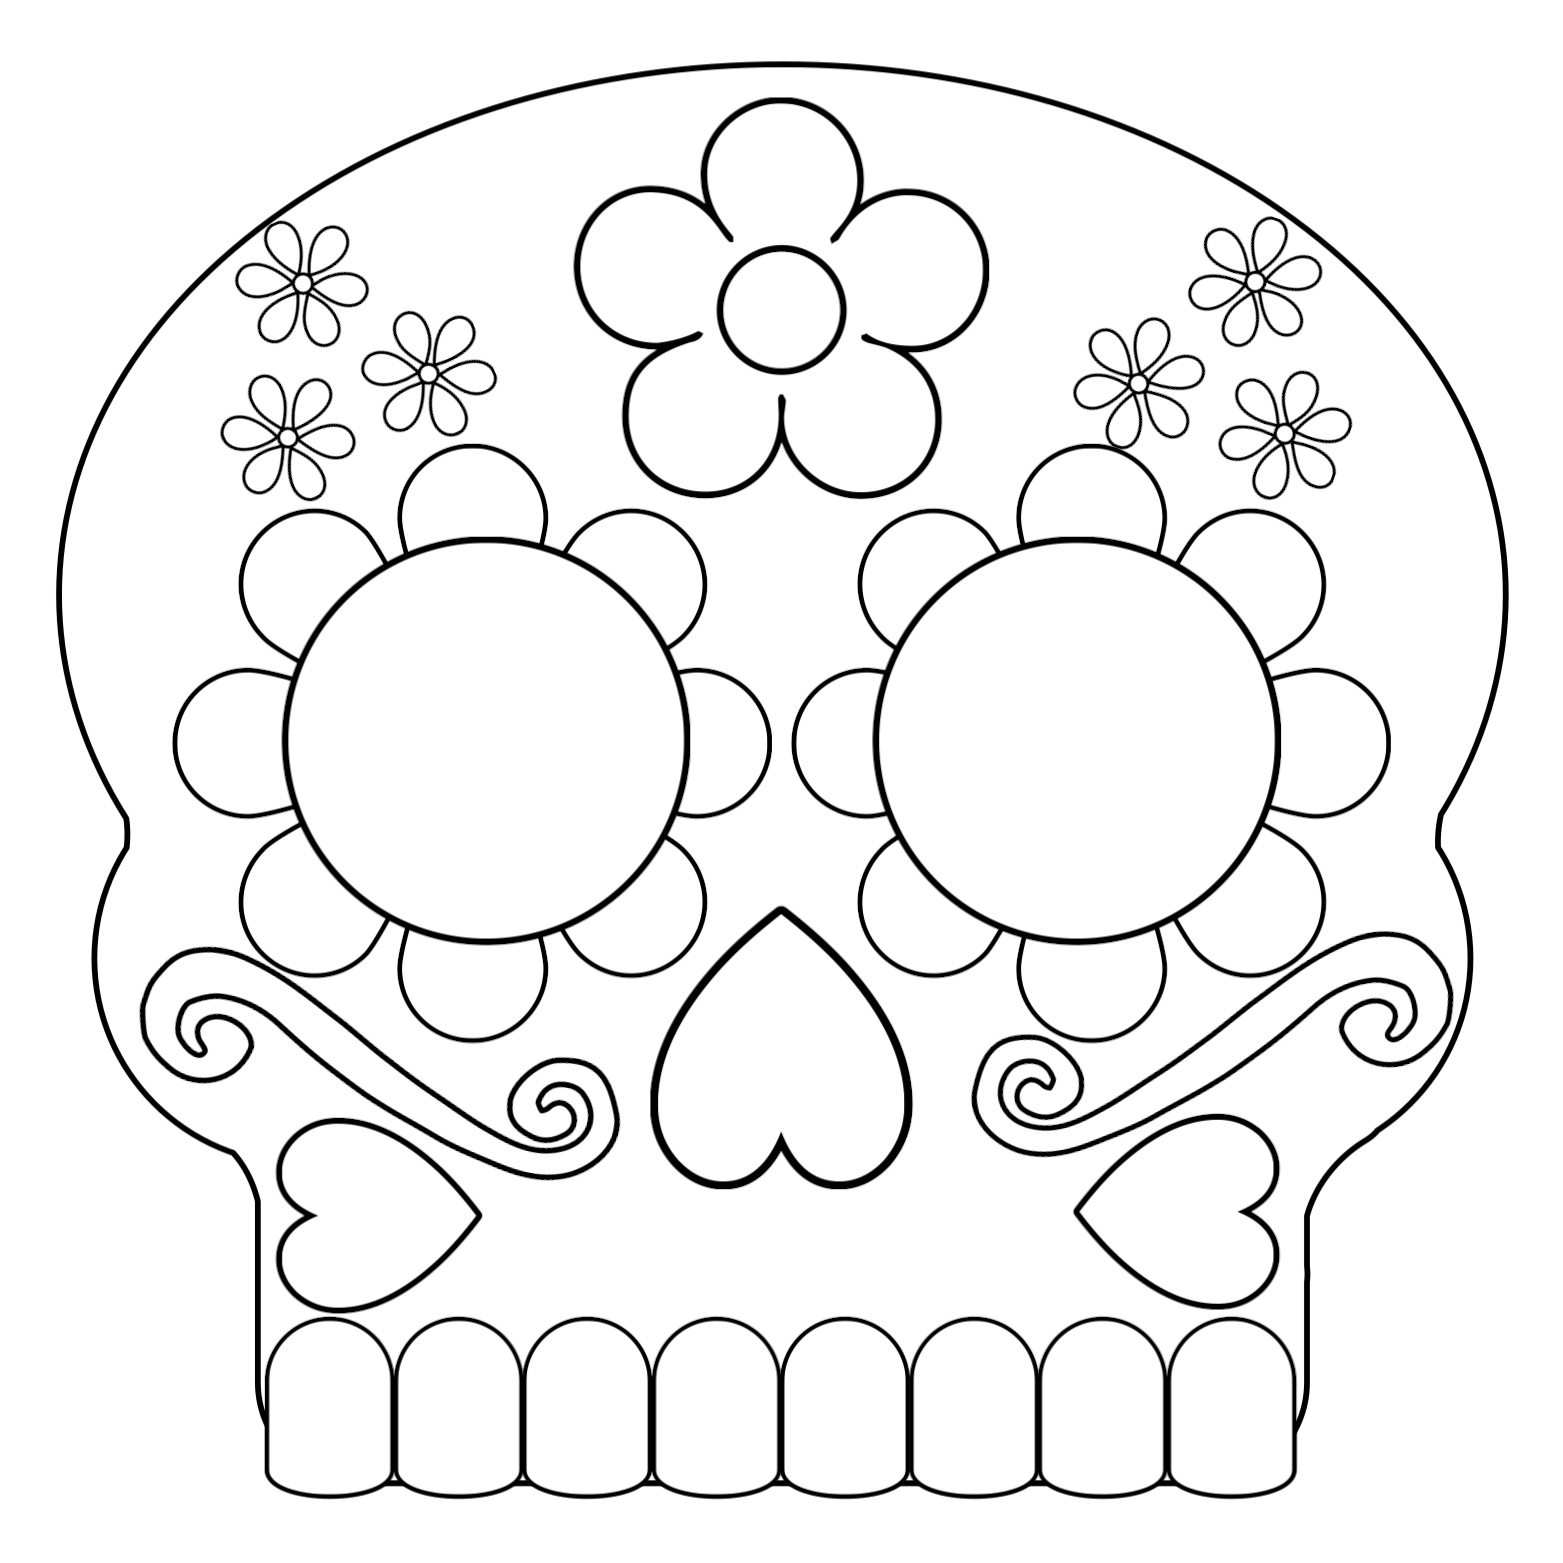 Day of the Dead Masks Sugar Skulls Free Printable - Paper Trail Design Within Blank Sugar Skull Template